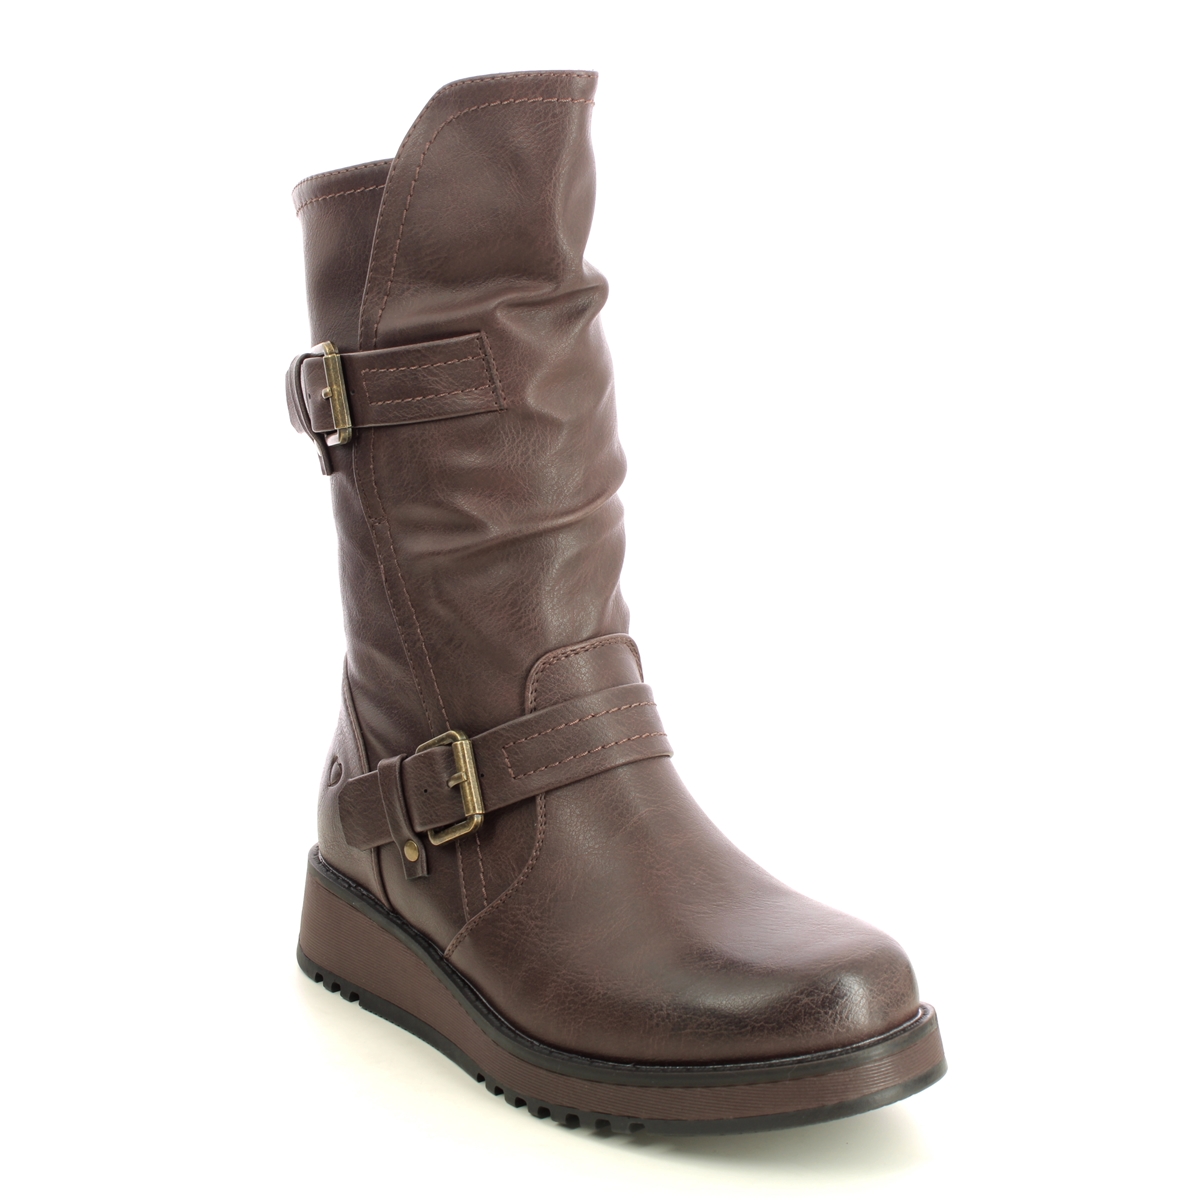 Heavenly Feet Hannah 4 Chocolate Brown Womens Mid Calf Boots 3507-27 In Size 6 In Plain Chocolate Brown